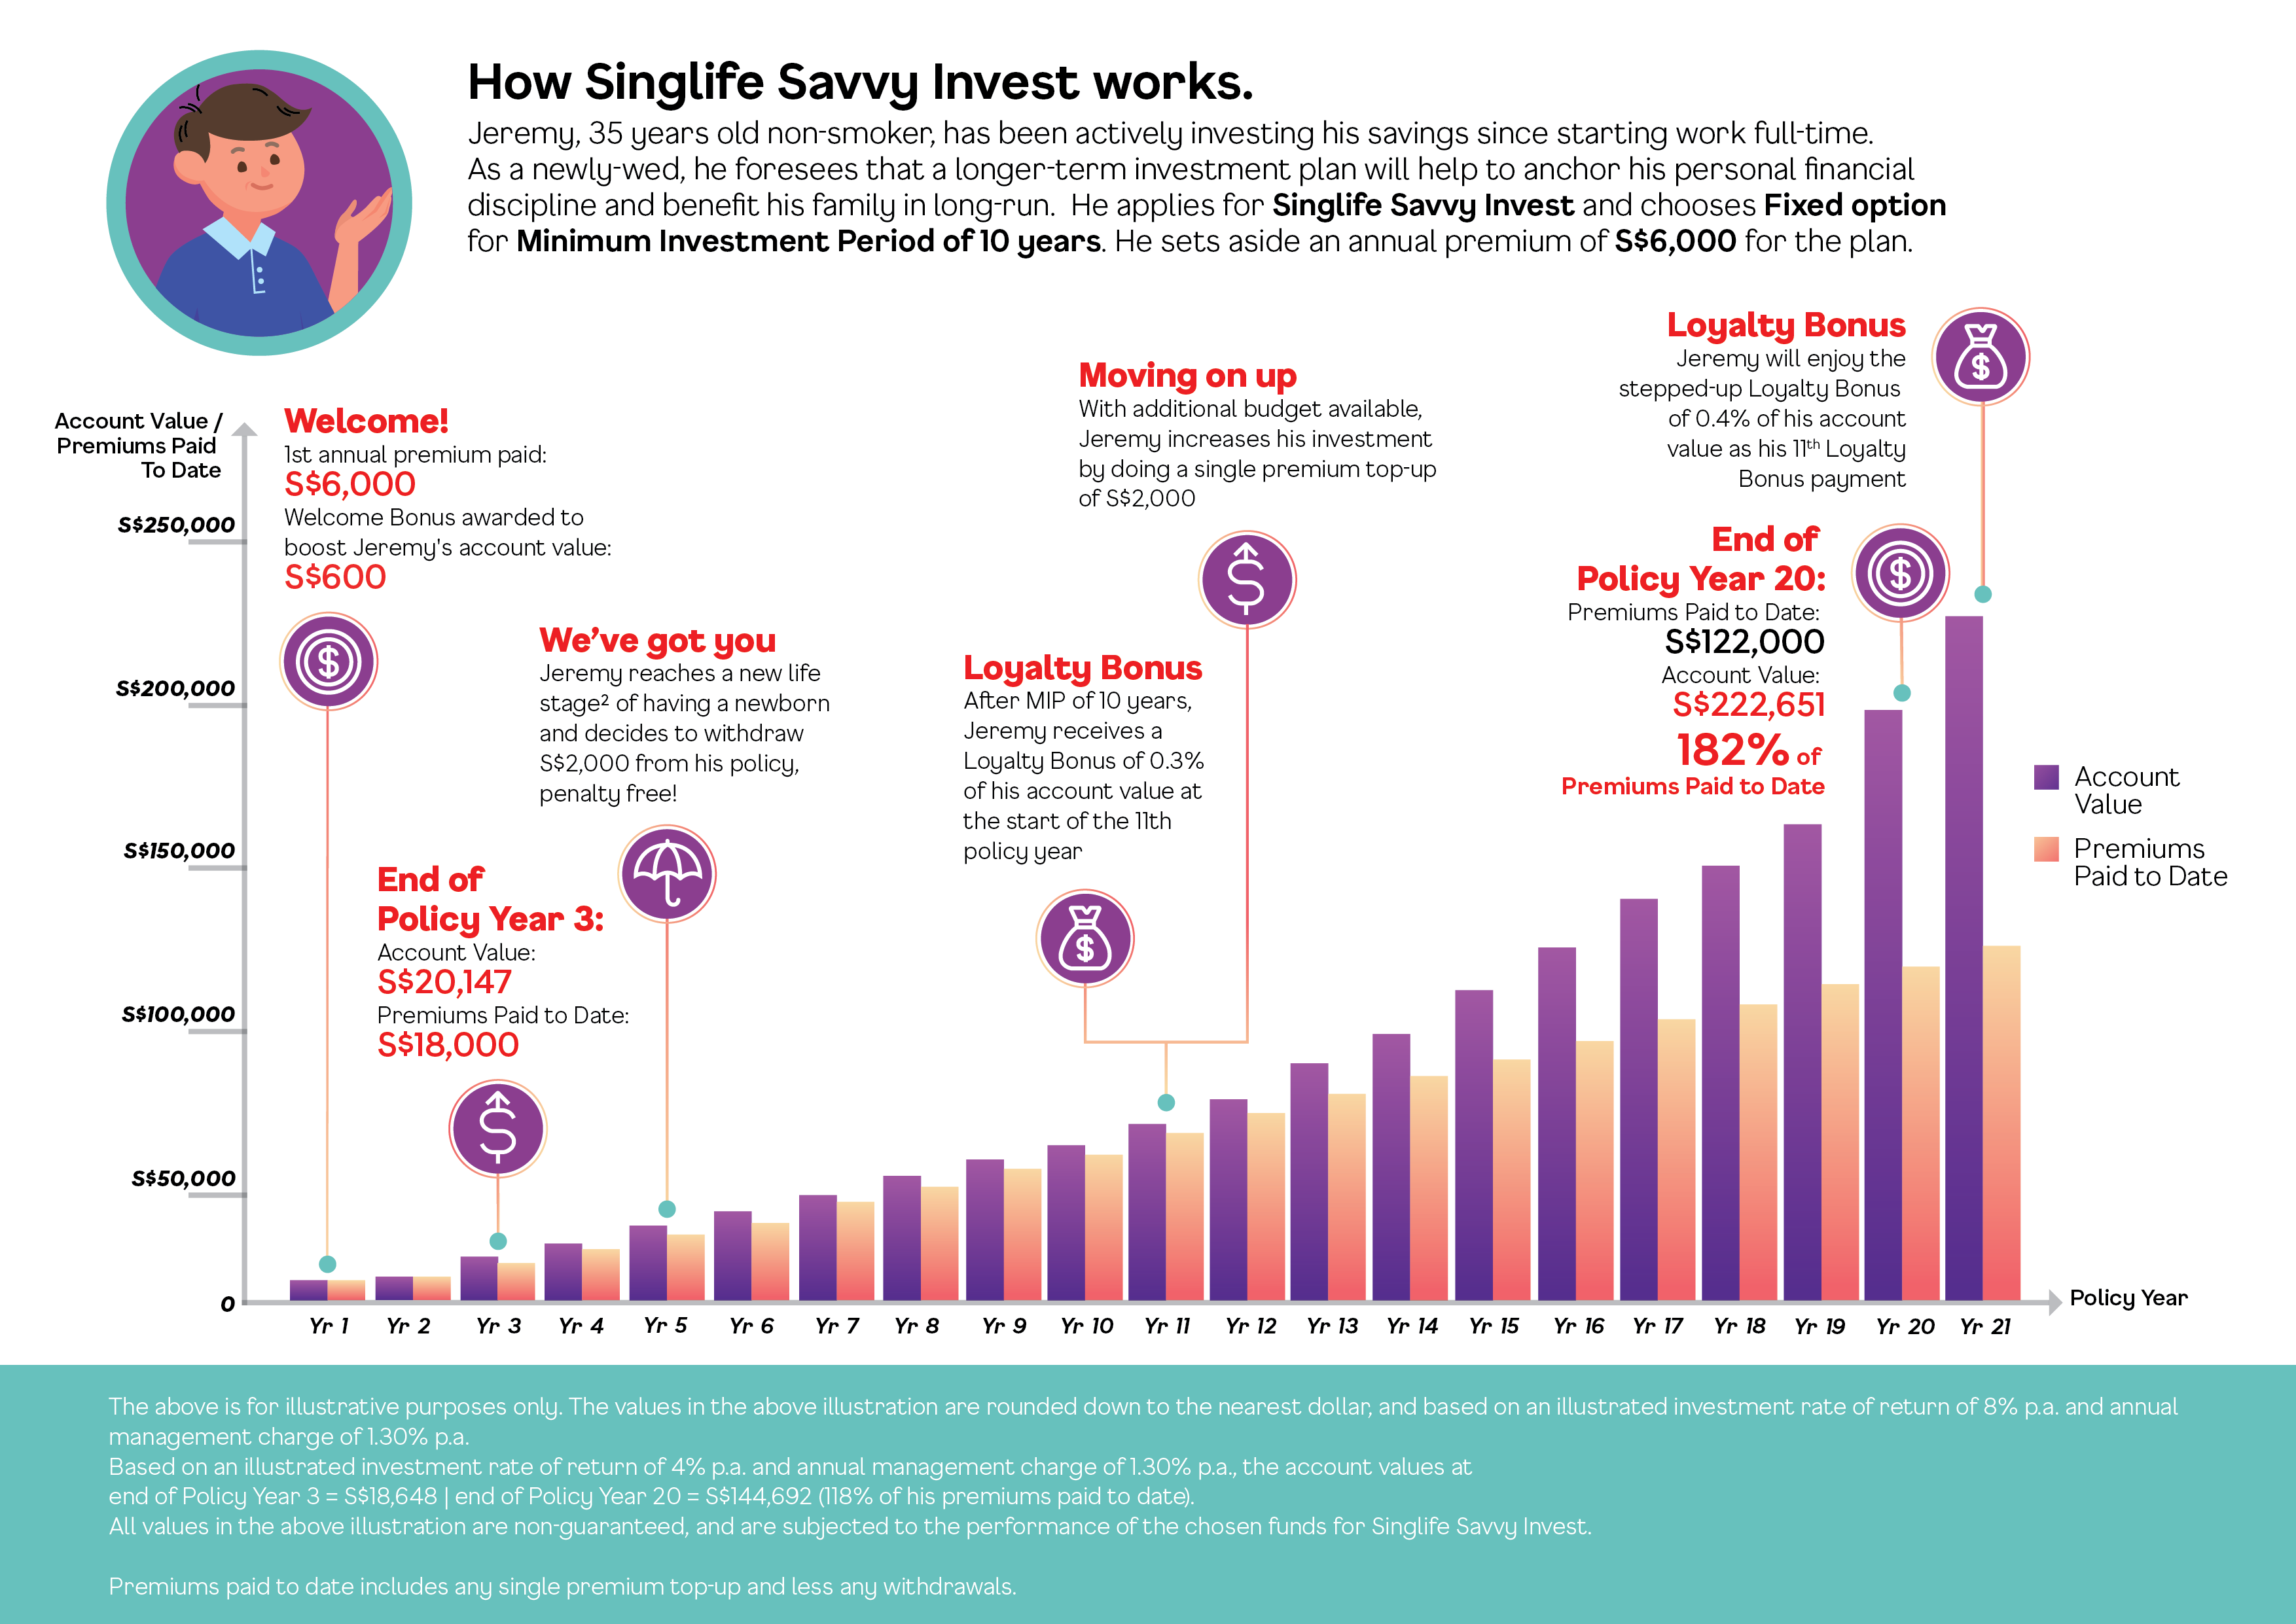 How Singlife with Aviva Savvy Invest Works